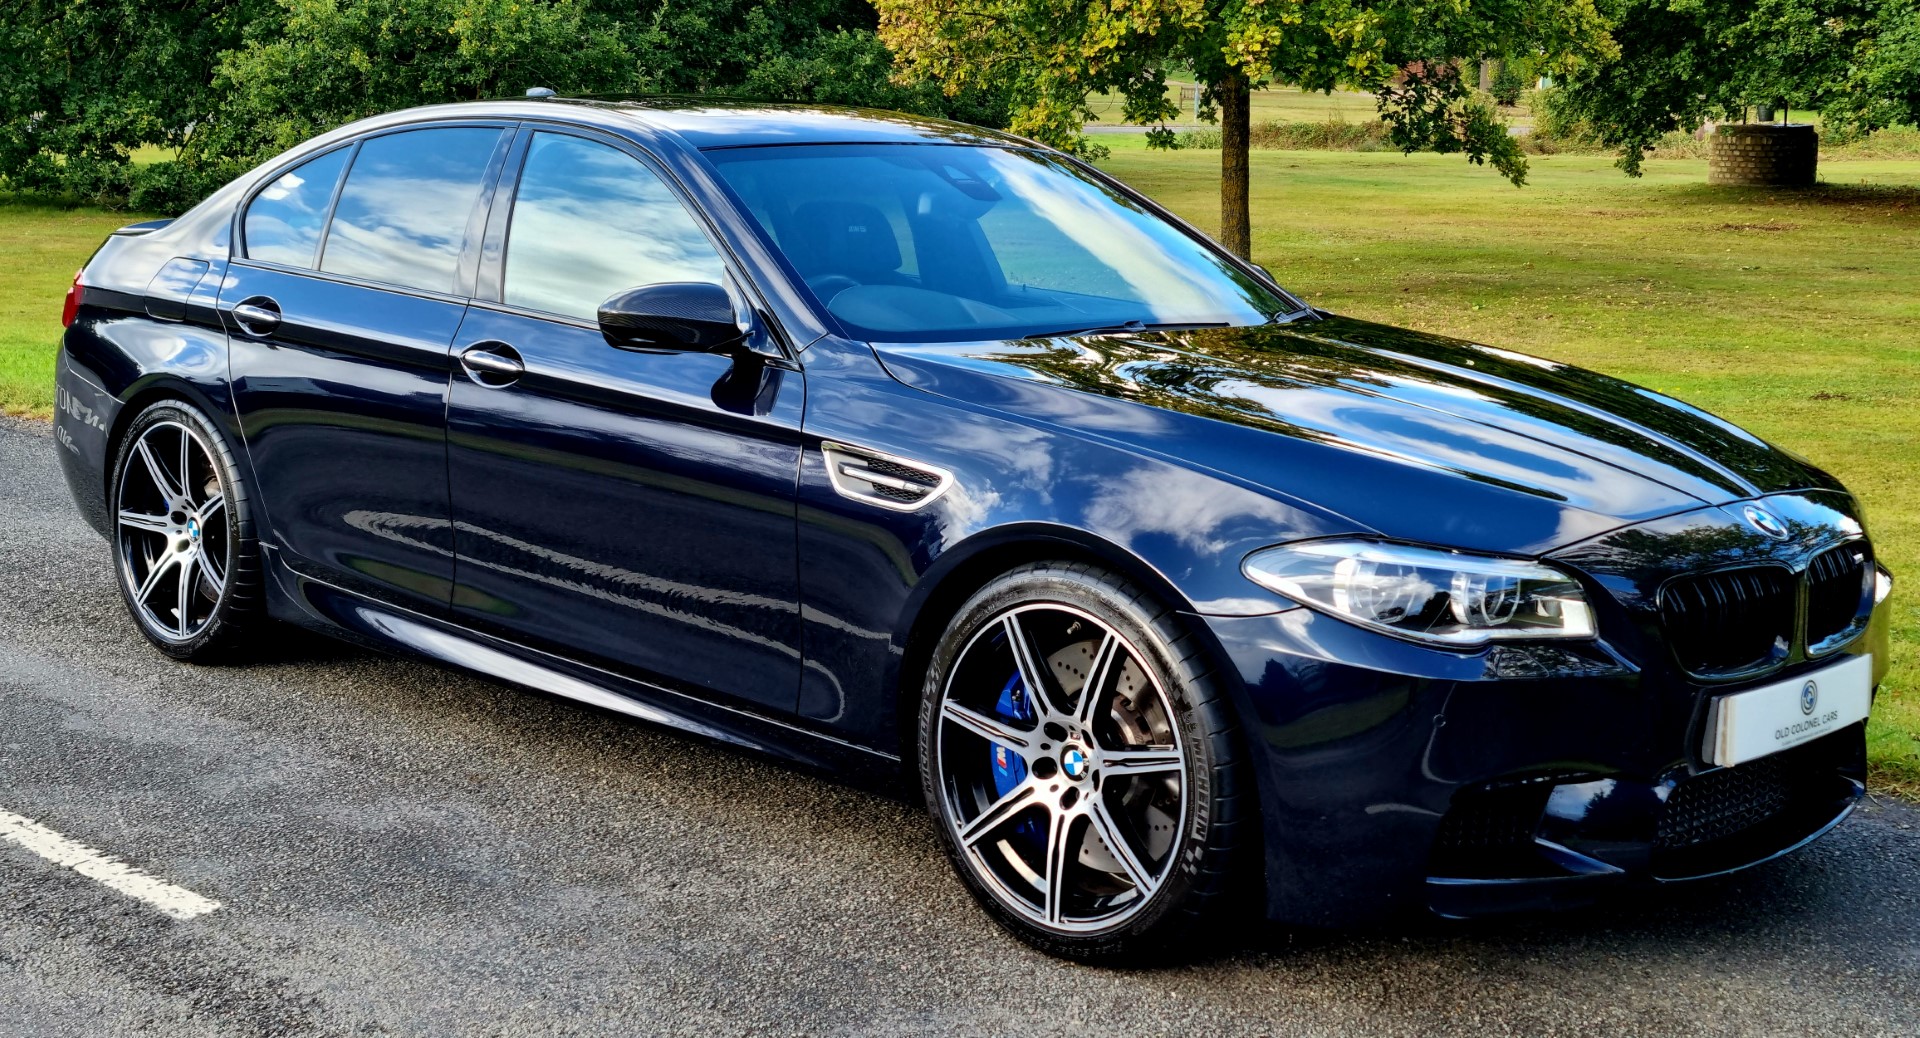 BMW F10 M5 COMPETITION EDITION - 1 OF 200 WORLDWIDE CARS - Old